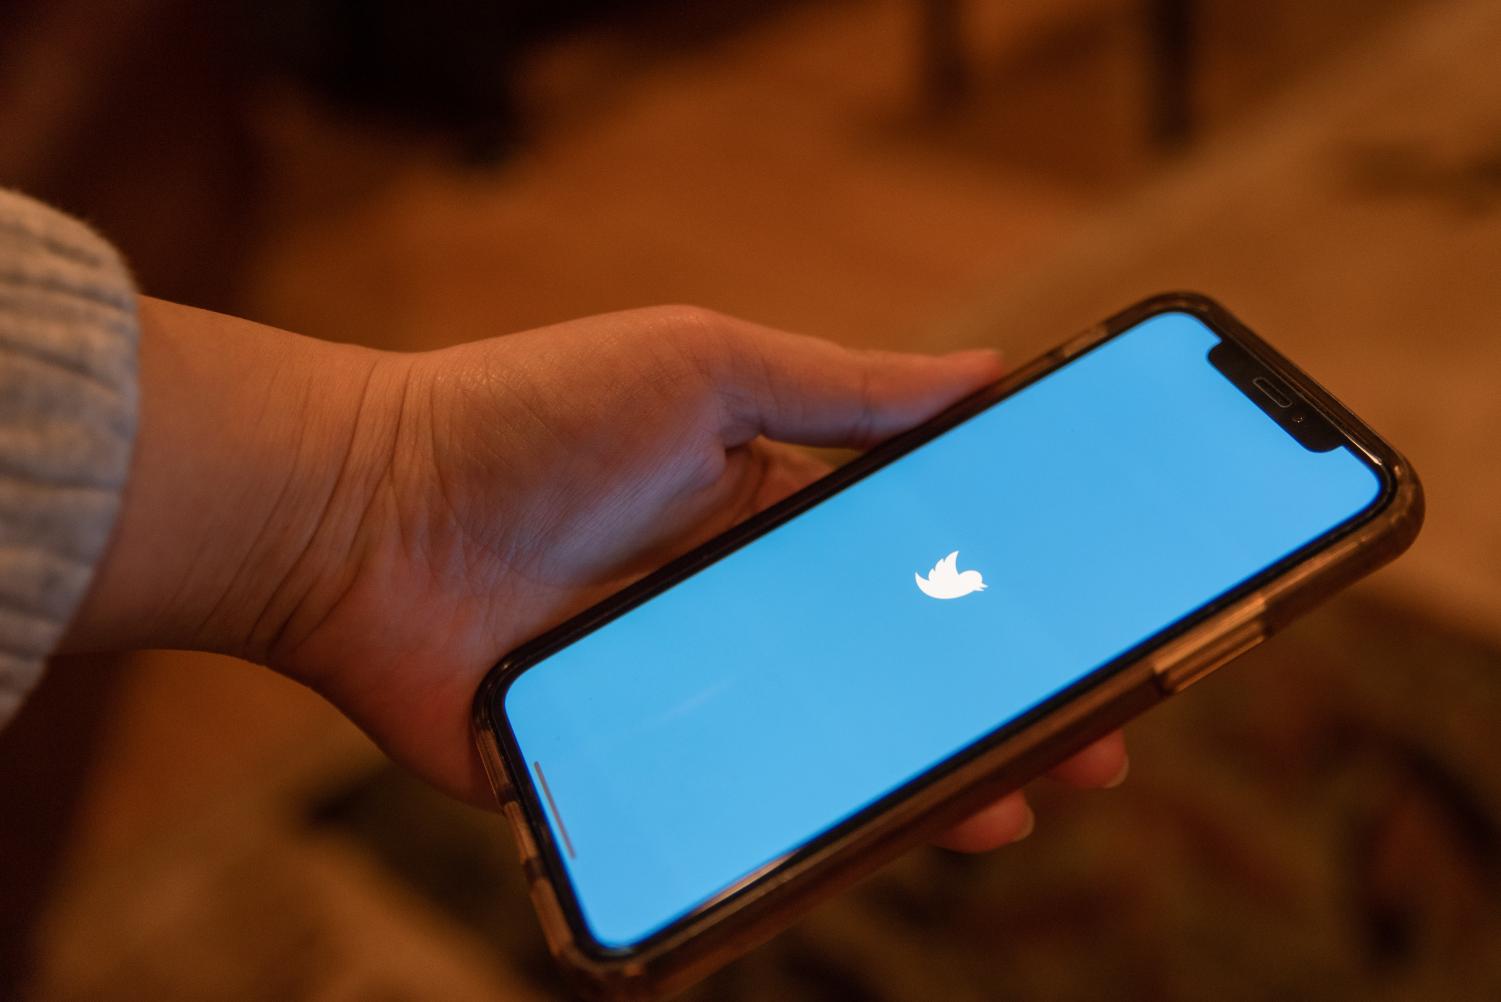 Opinion | After prolonged inaction against abuse, its time to hold Twitter accountable